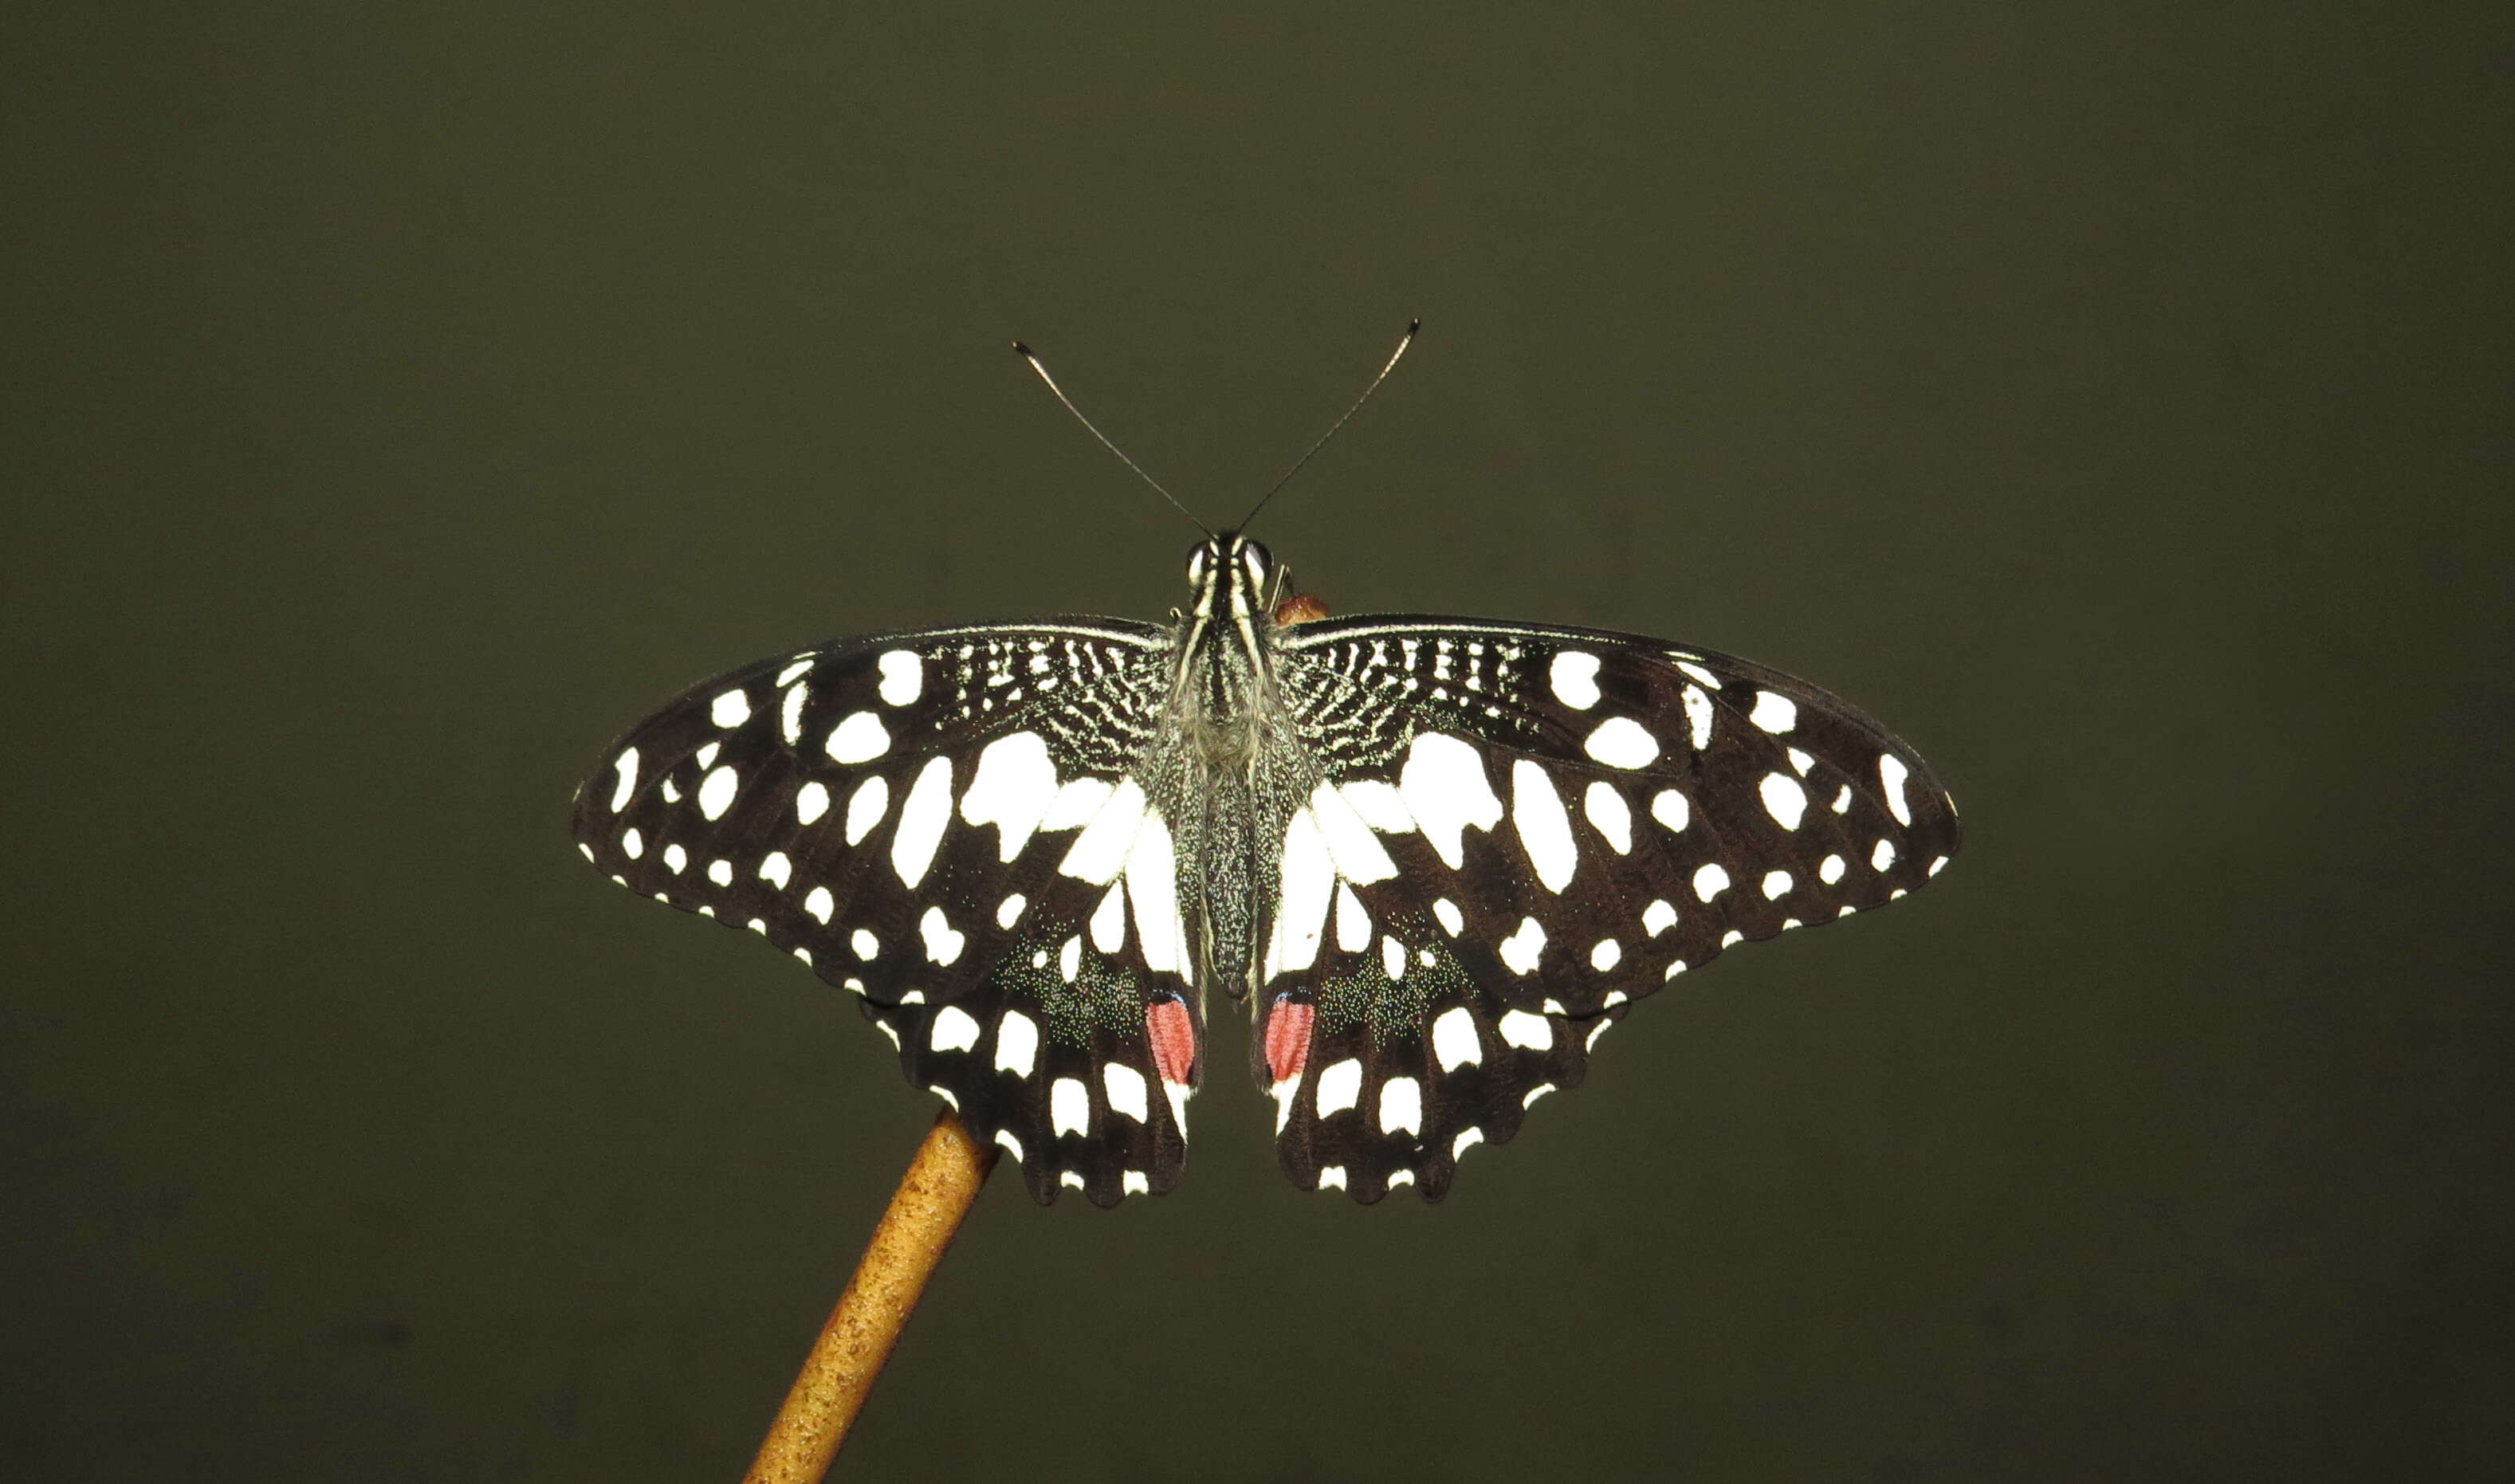 Image of Lime butterfly